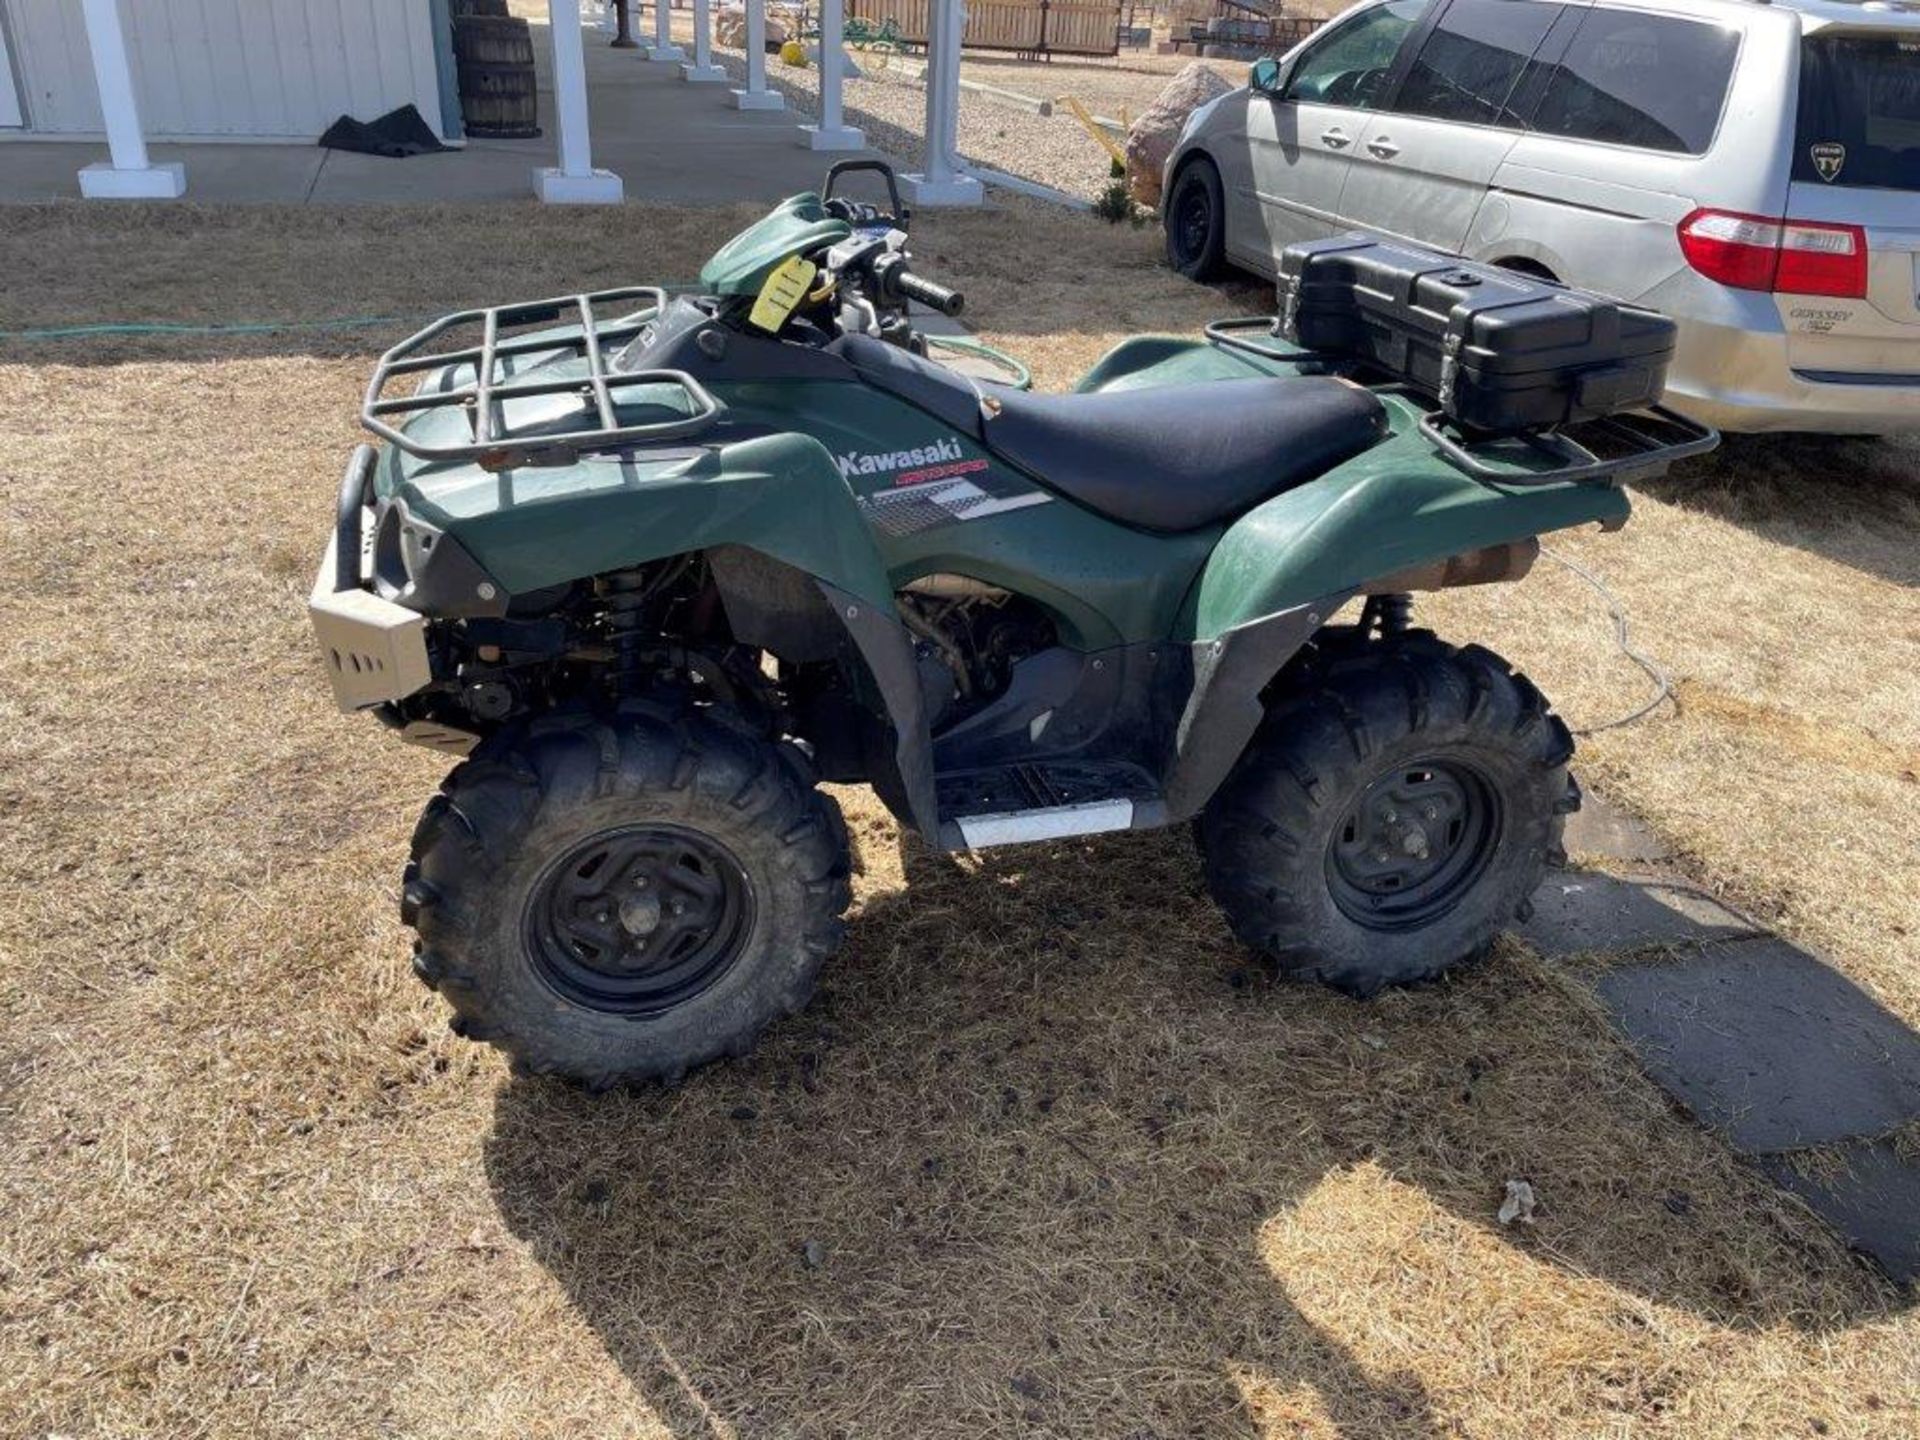 2007 KAWASAKI BRUTE FORCE 750 ATV 4X4 AUTO, RECENT CARB CLEAN, NEW BATTERY, 1762 KM'S SHOWING - Image 3 of 19